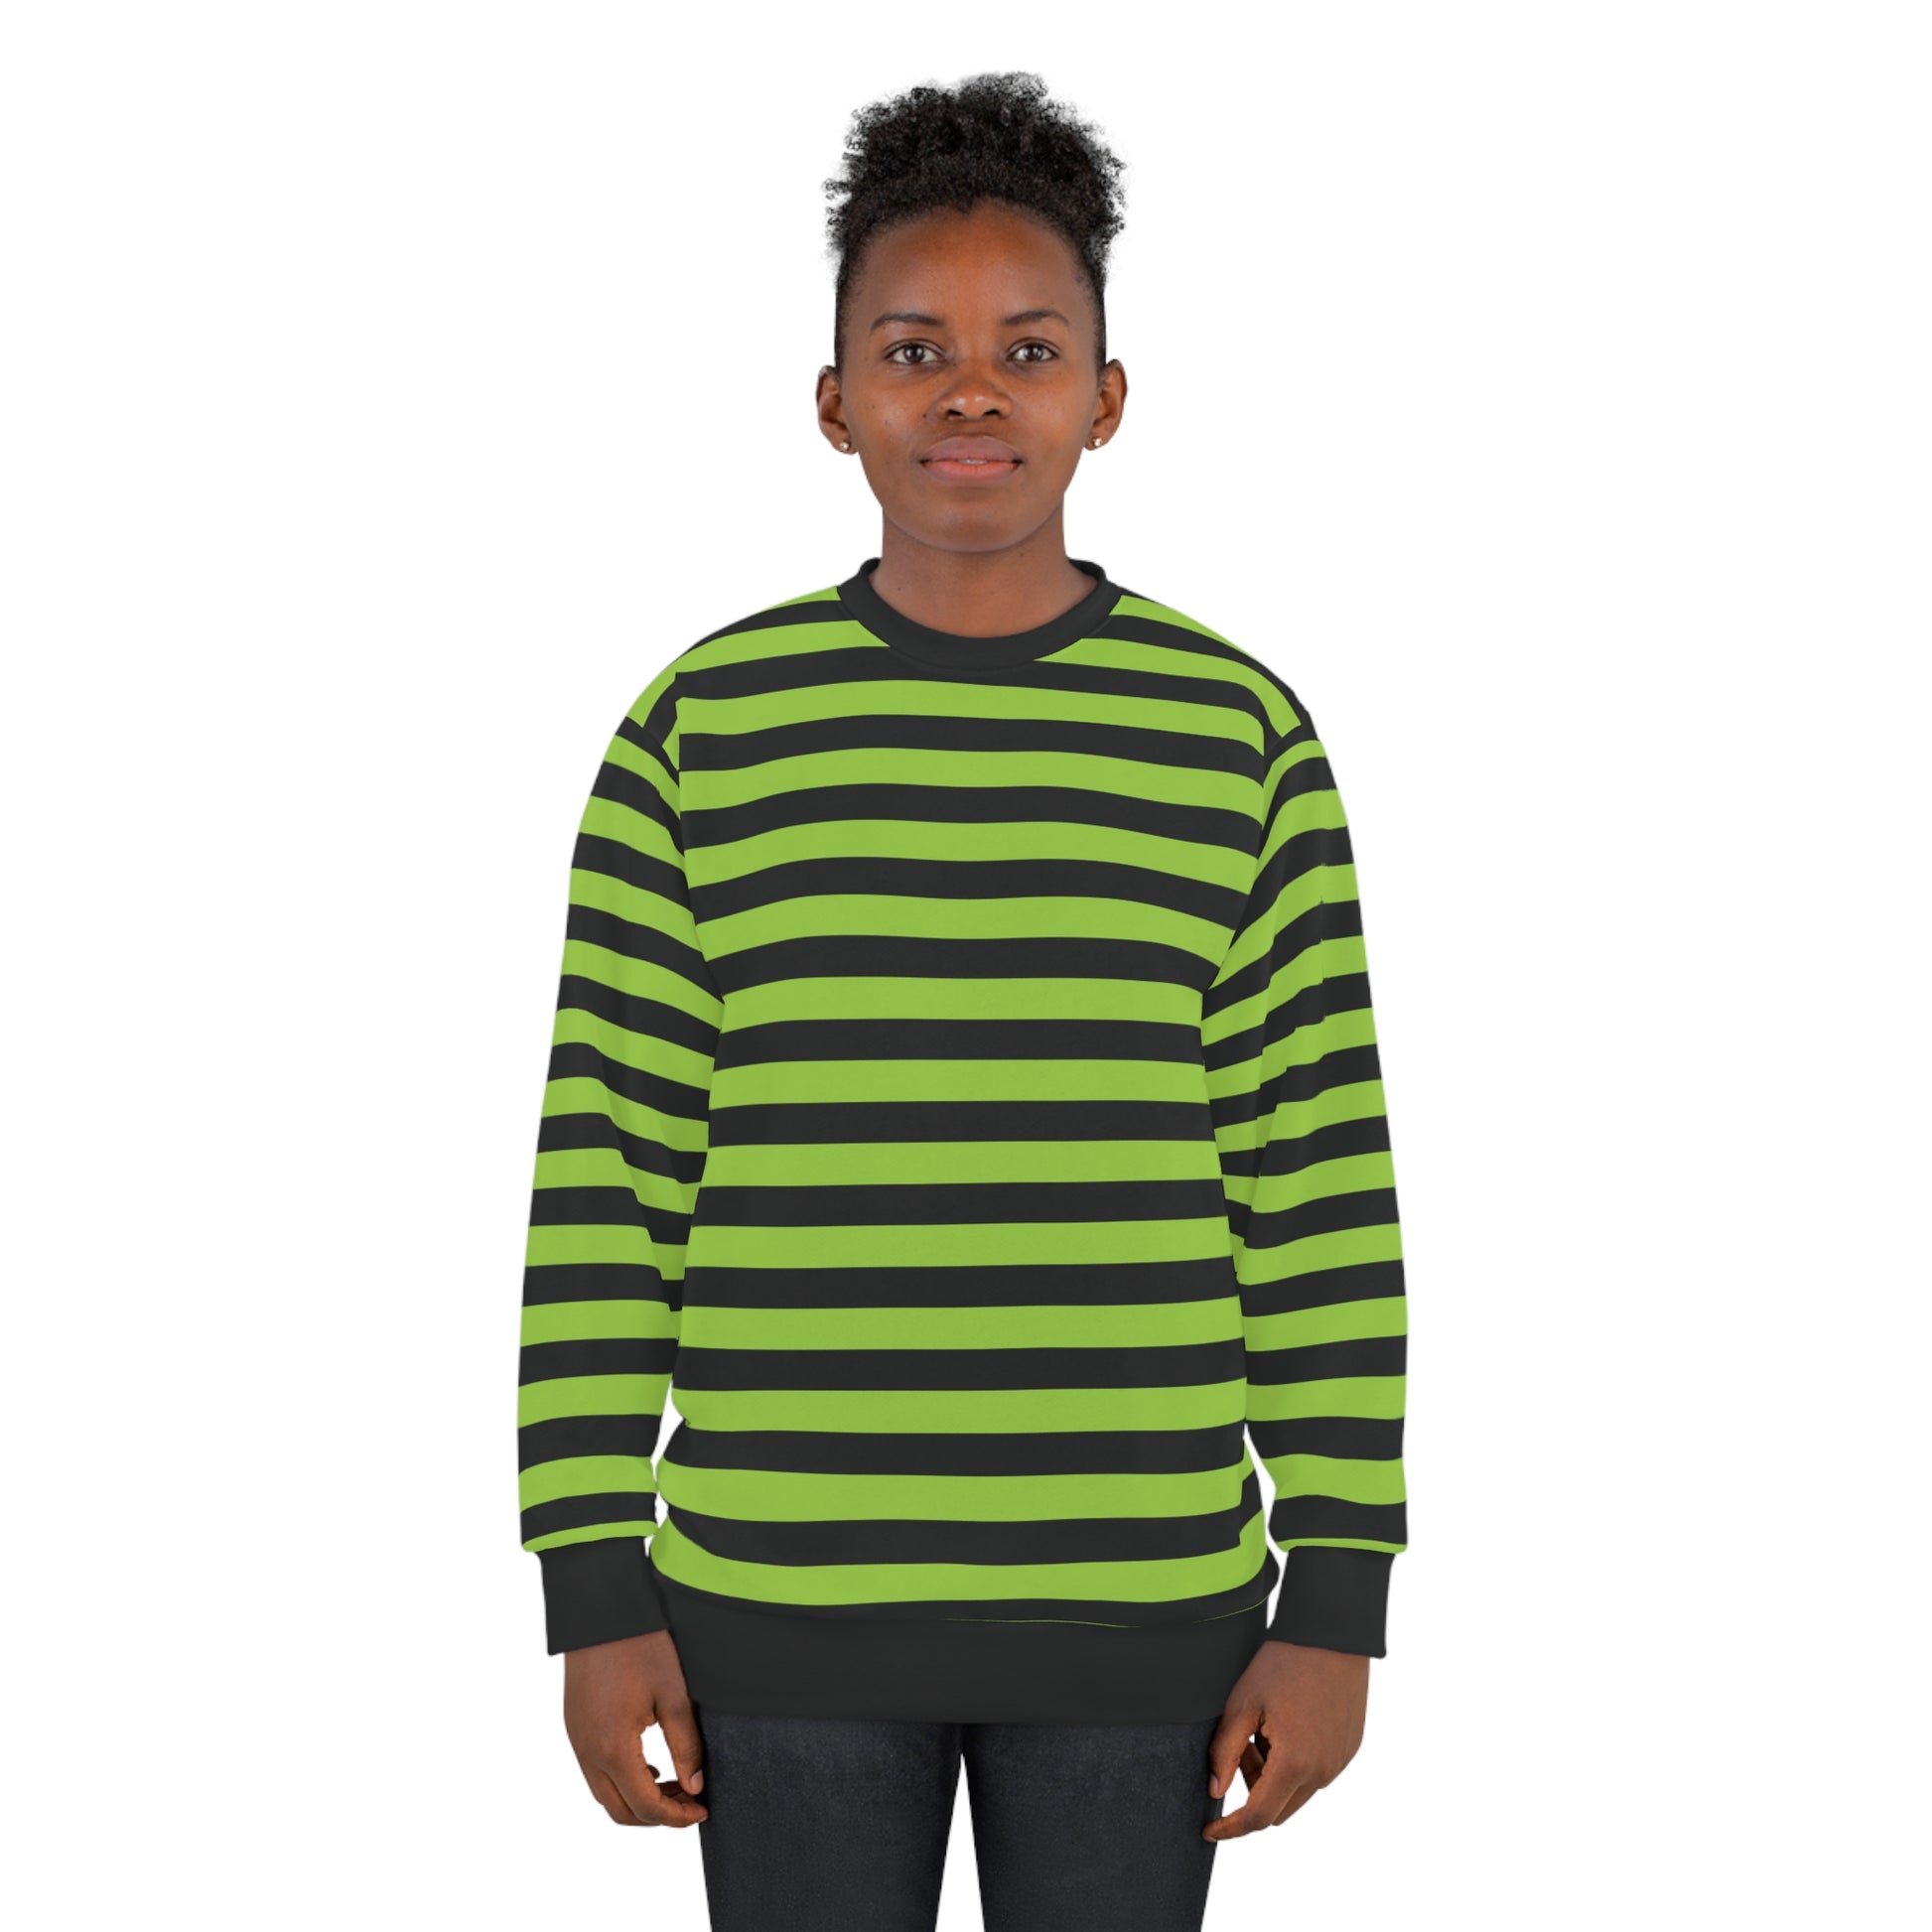 black and green striped sweater